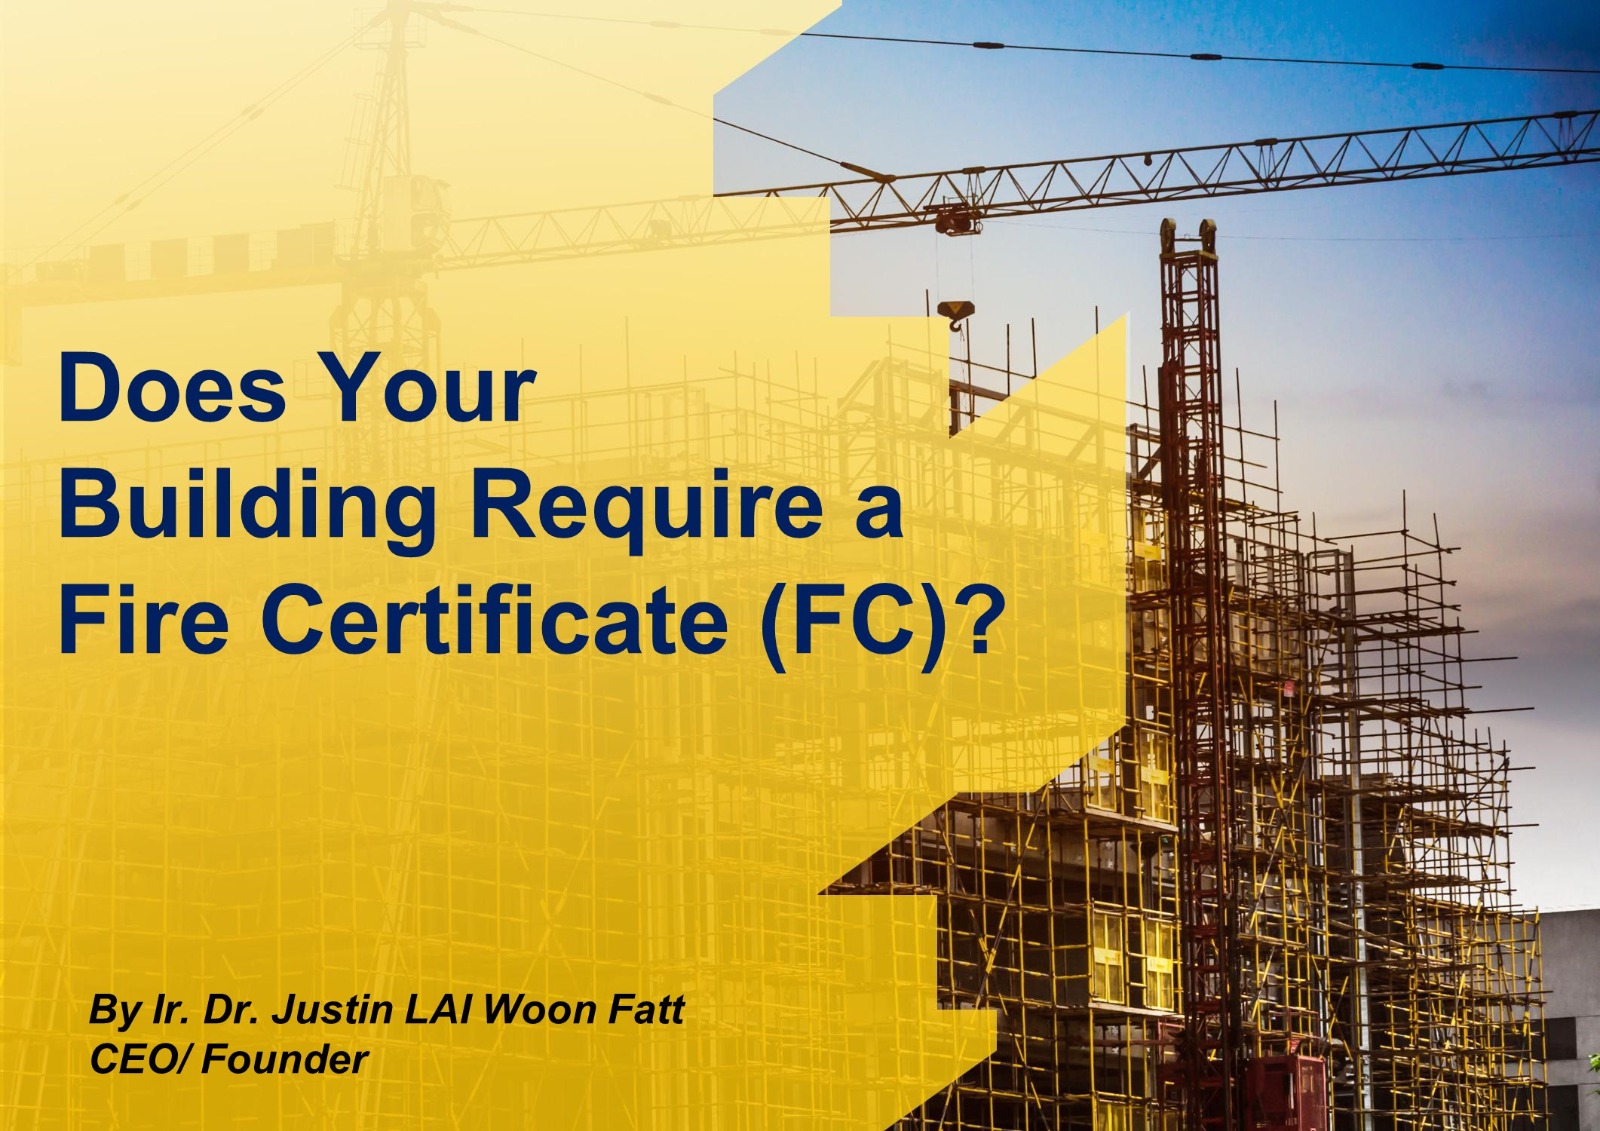 Does Your Building Require a Fire Certifcate (FC)